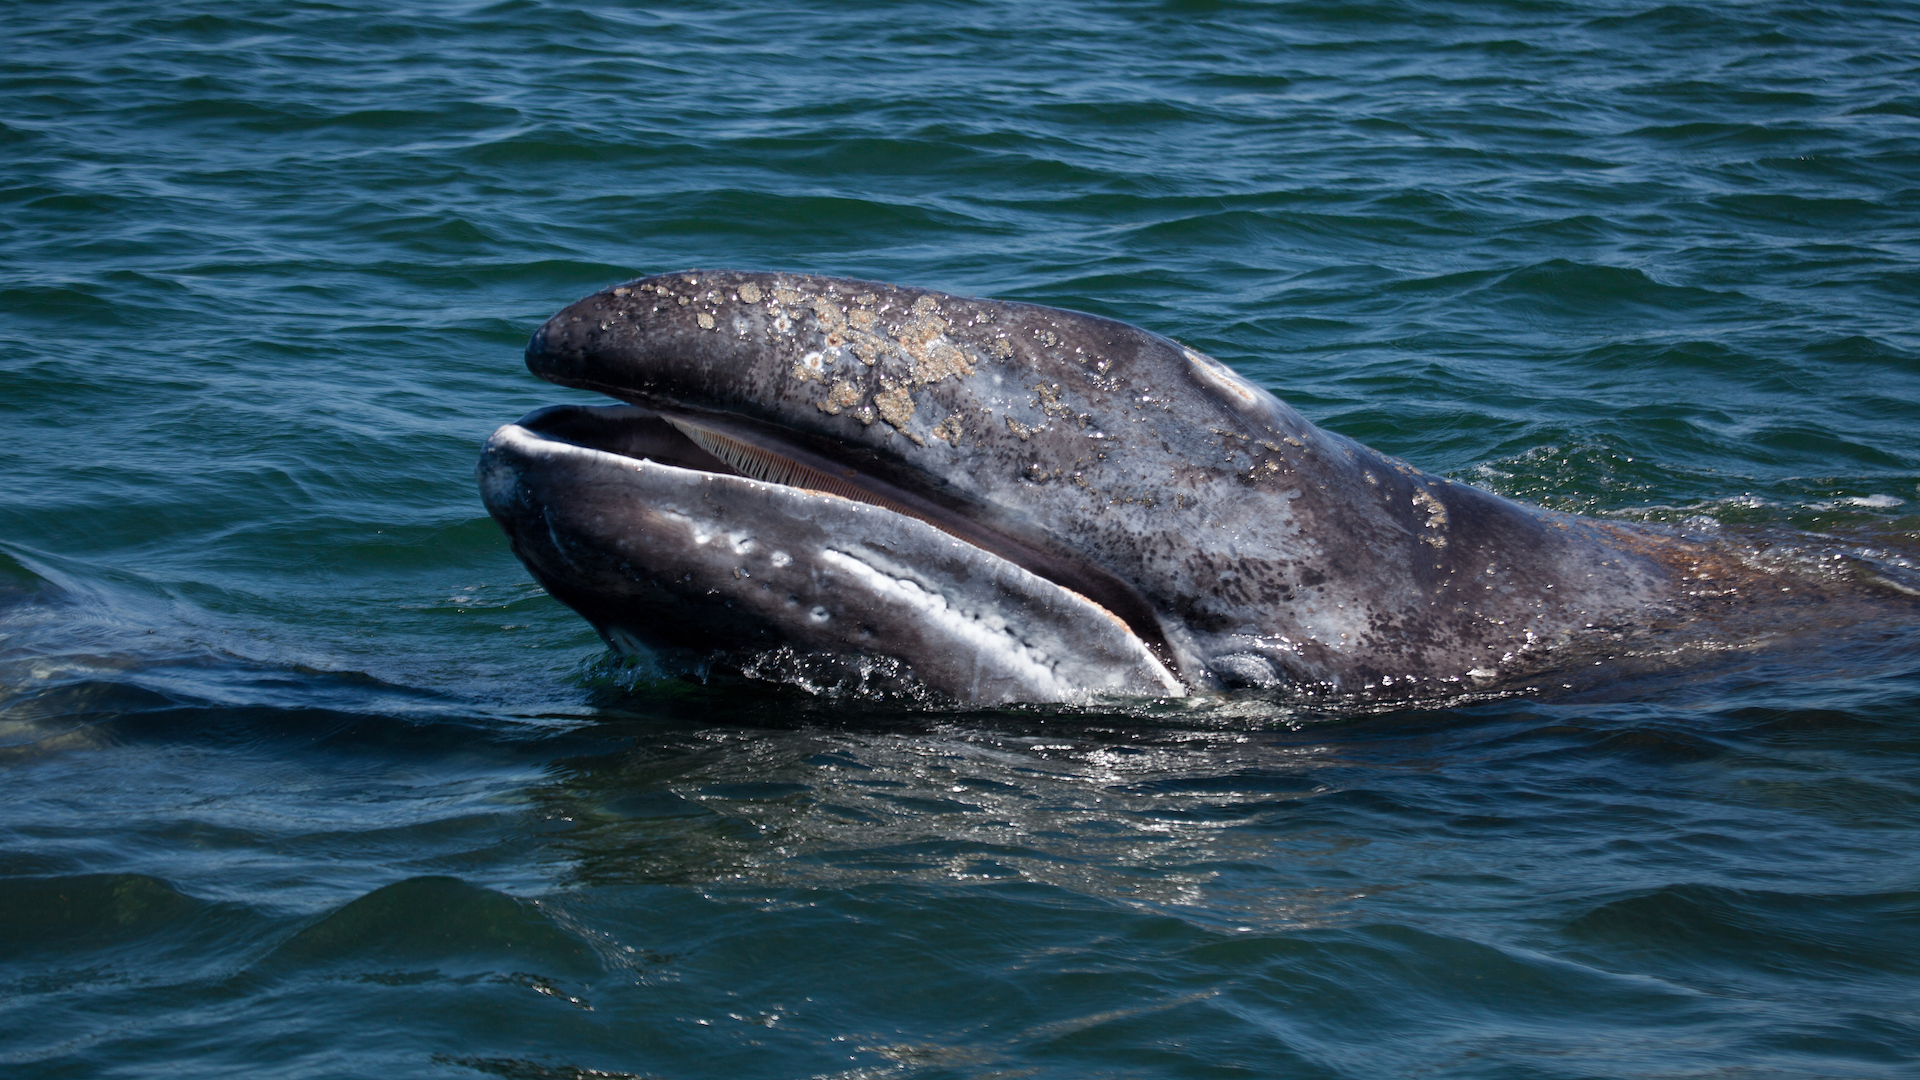 Solar Storms Might Be Causing Gray Whales to Get Lost | Live Science